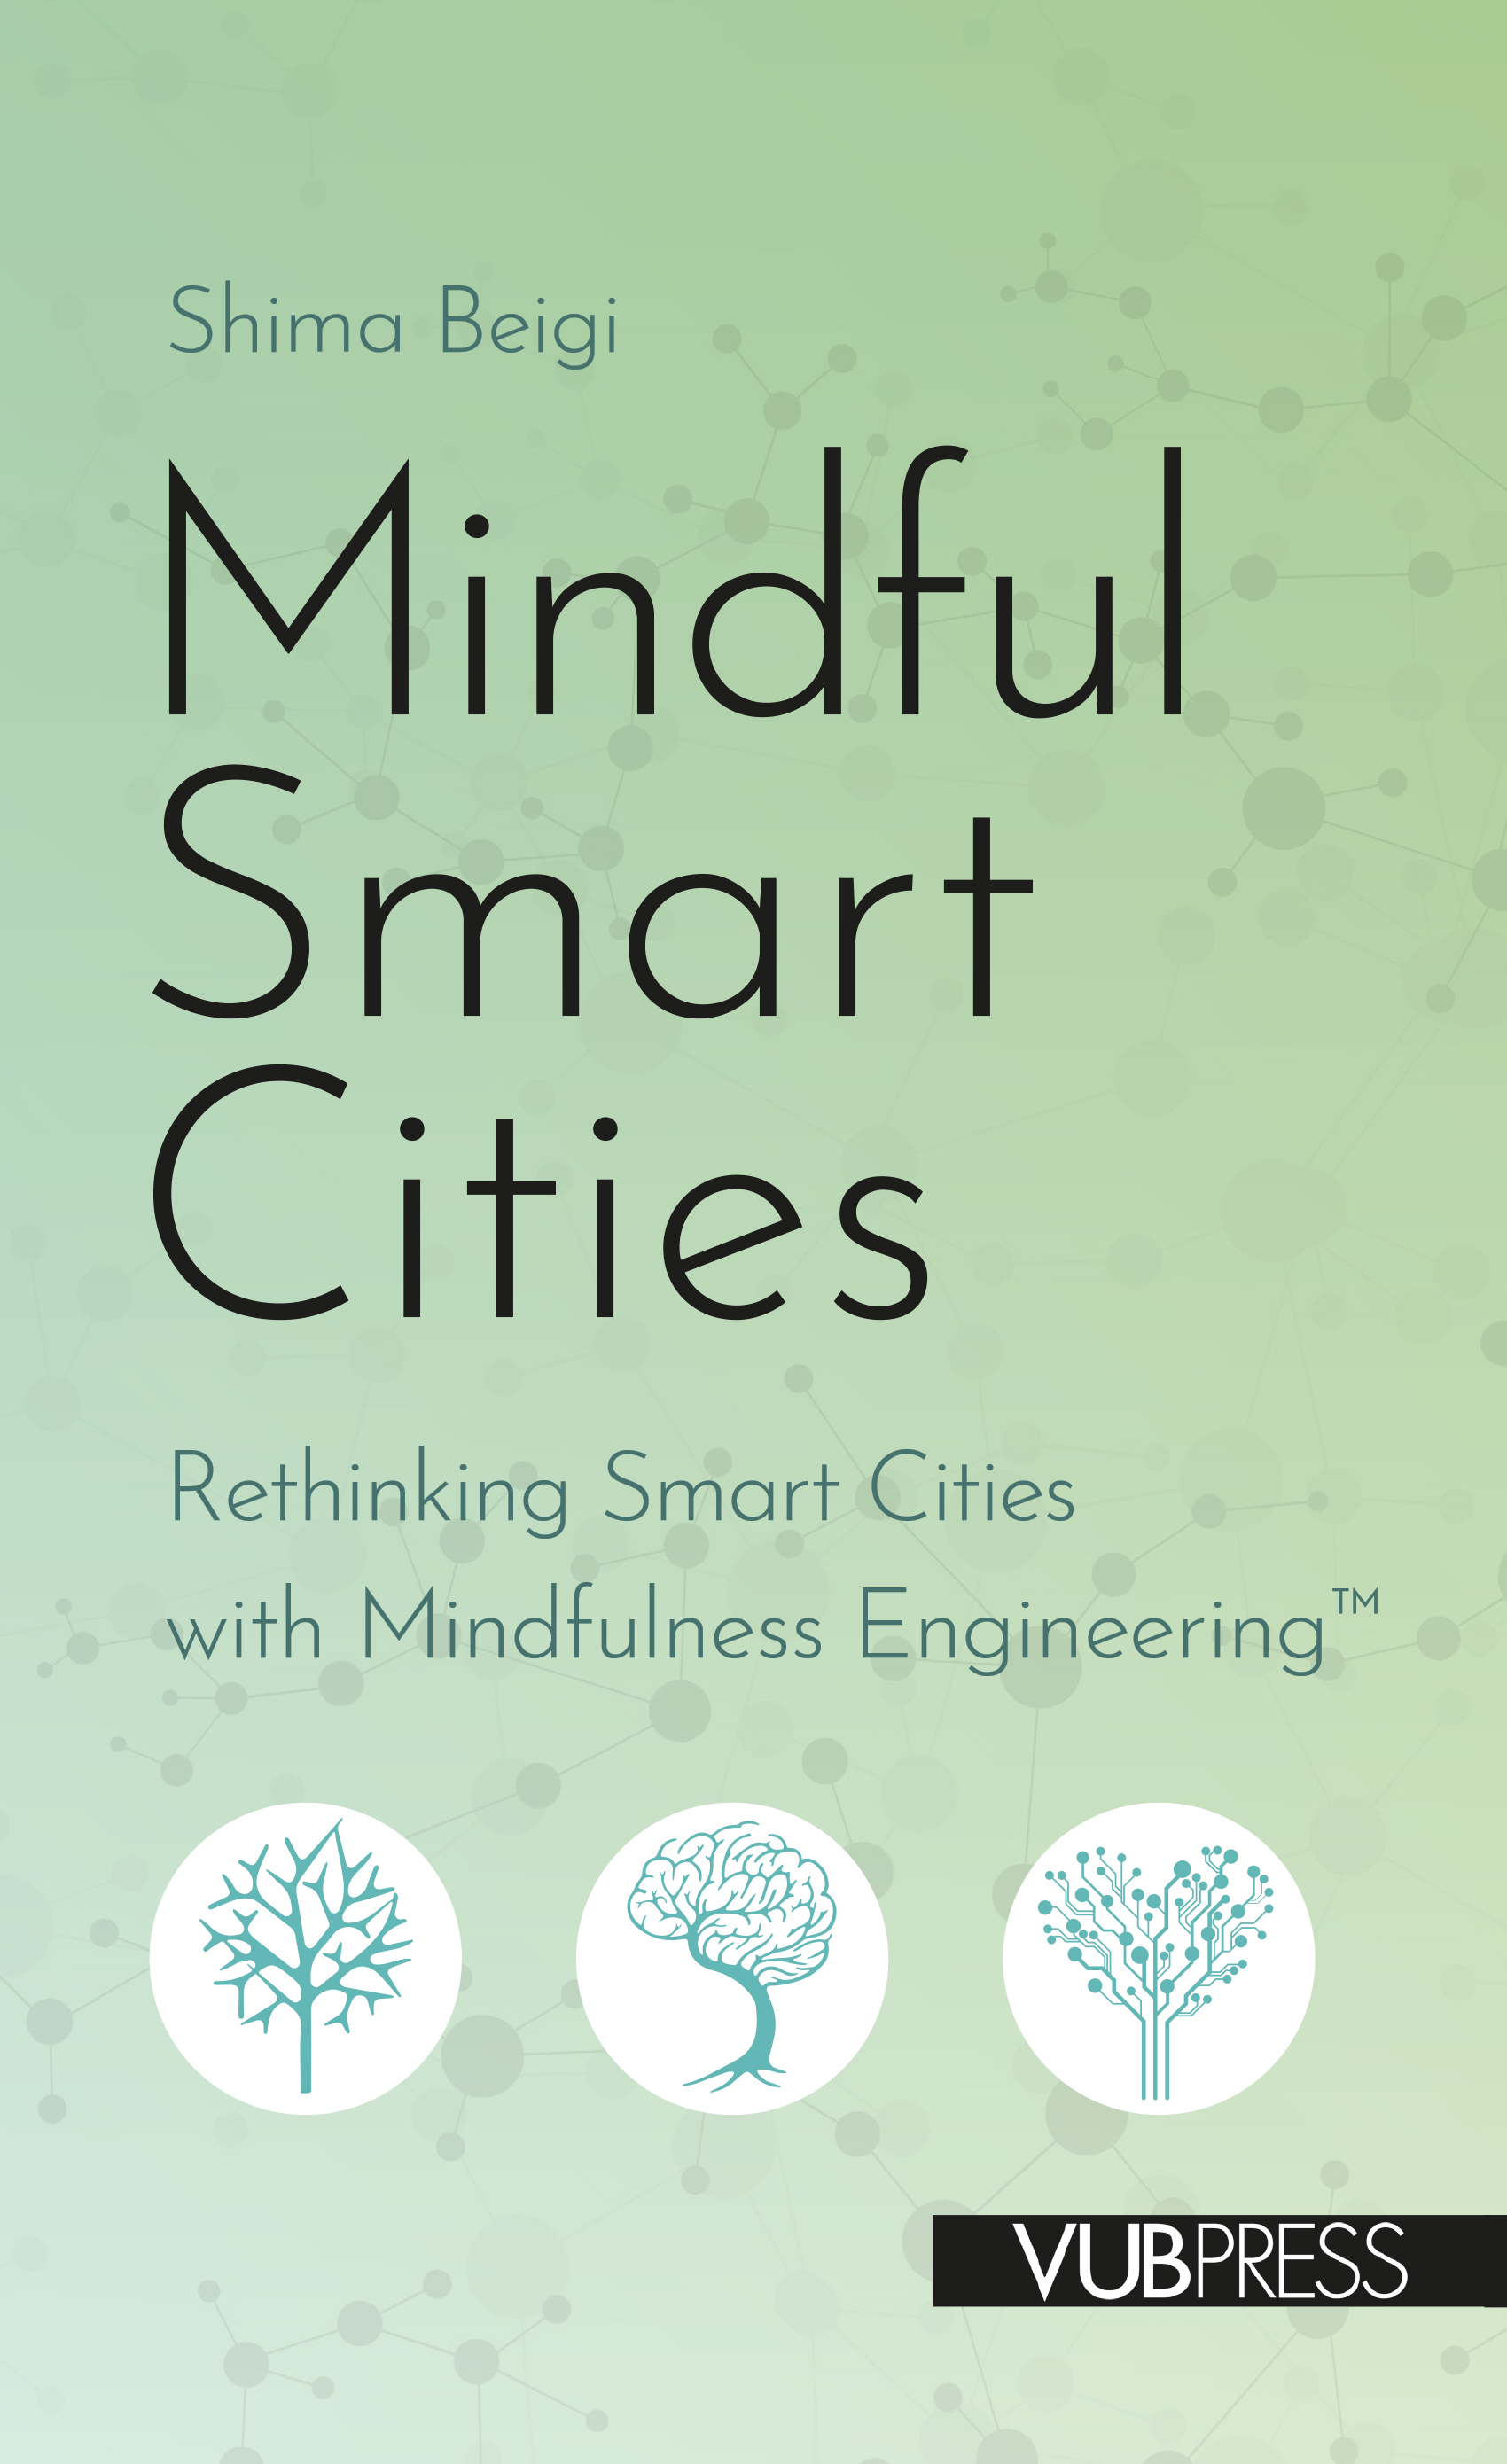 MINDFUL SMART CITIES